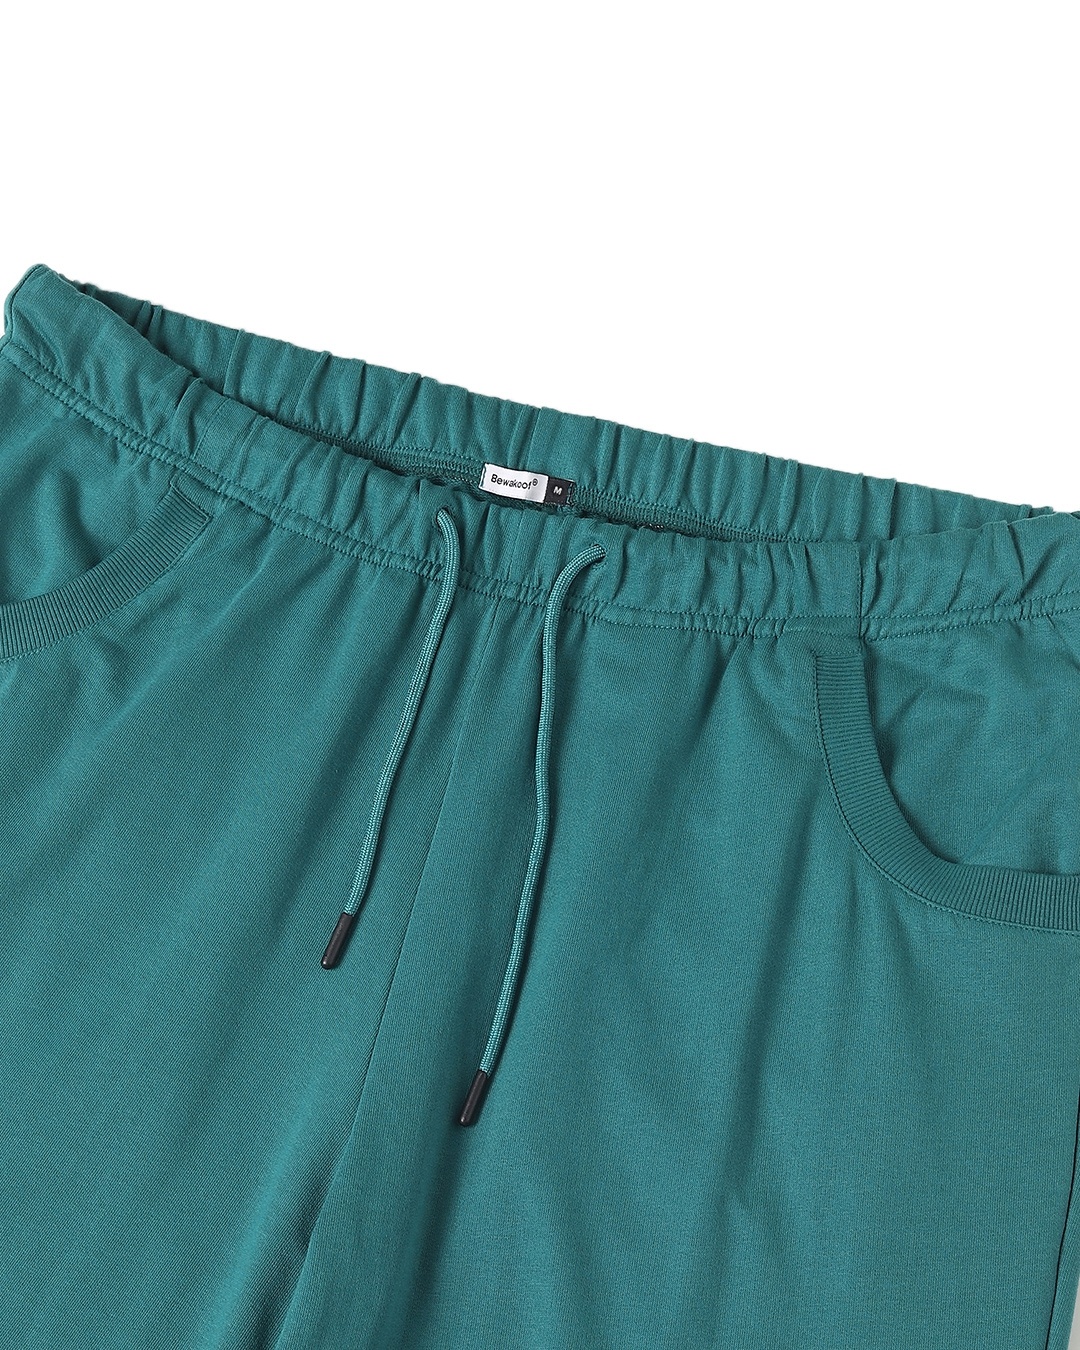 Shop Snazzy Green Basic Jogger